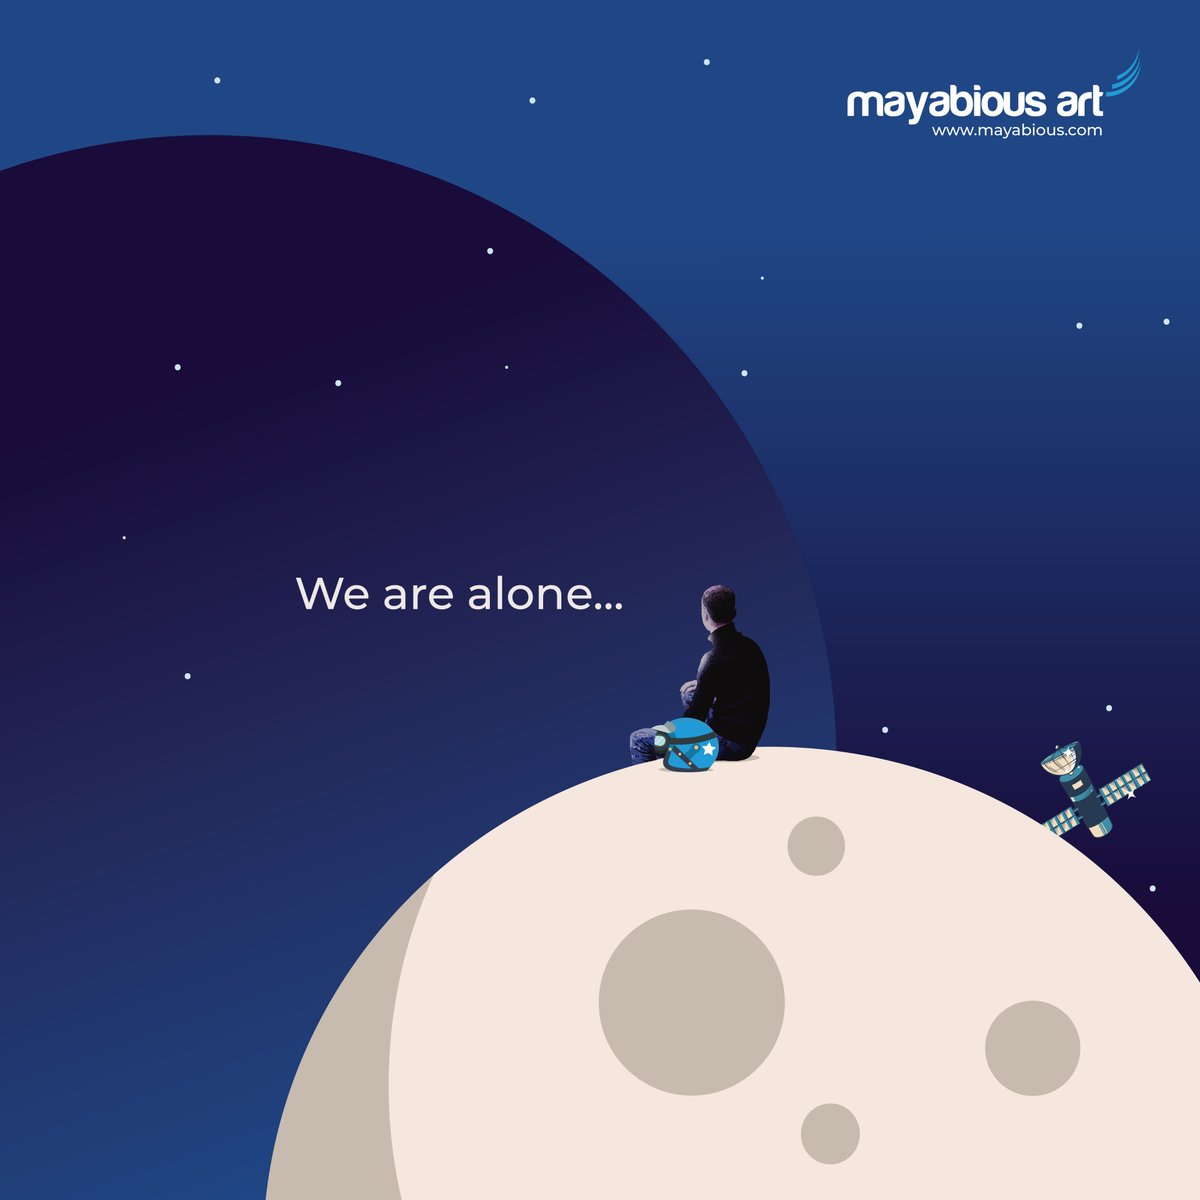 When brilliance meets excellence, you can cover the greatest distance.

🌐- mayabious.com

#3D #3dvisualization #3dwalkthrough #brochuredesigning #scalemodel #AugmentedReality #VR #creativeagency #AdvertisementAgency #WeAreAlone #mayabiousgroup